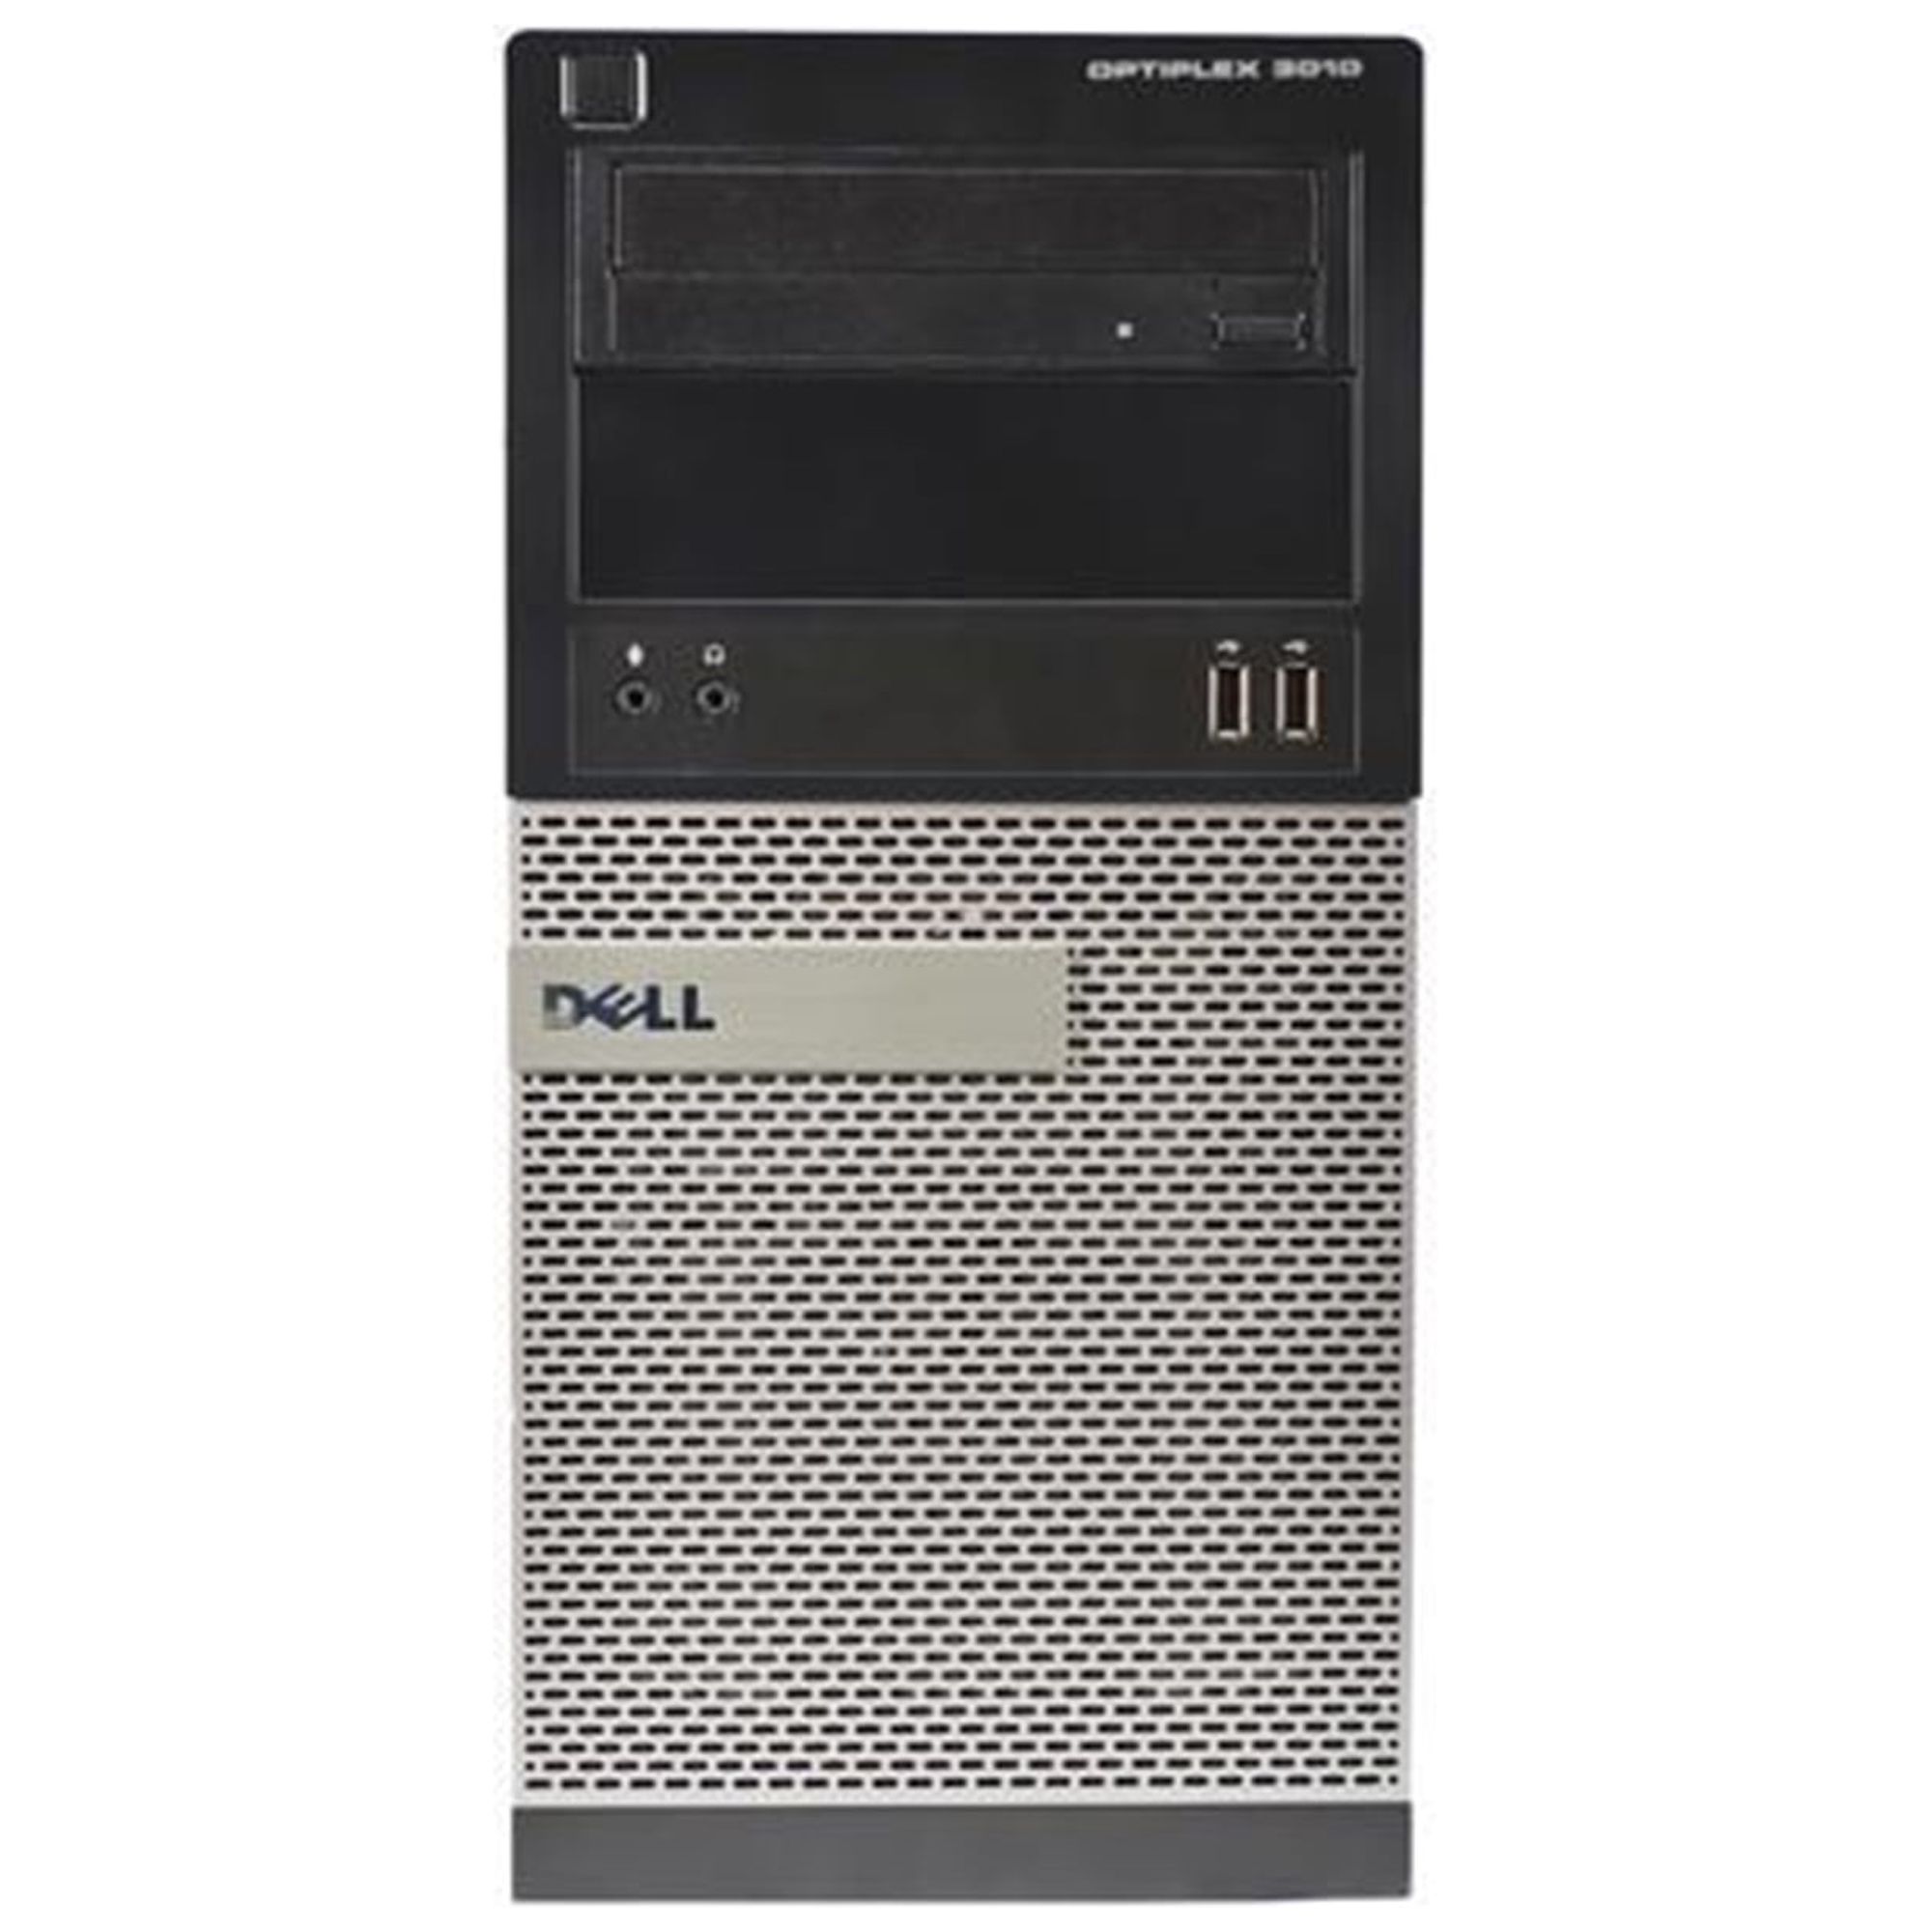 "DELL Optiplex 3010 Tower Computer PC, Intel Quad-Core i5, 1TB HDD, 8GB DDR3 RAM, Windows 10 Pro, DVD, WIFI, USB Keyboard and Mouse (Used - Like New)" - image 1 of 3